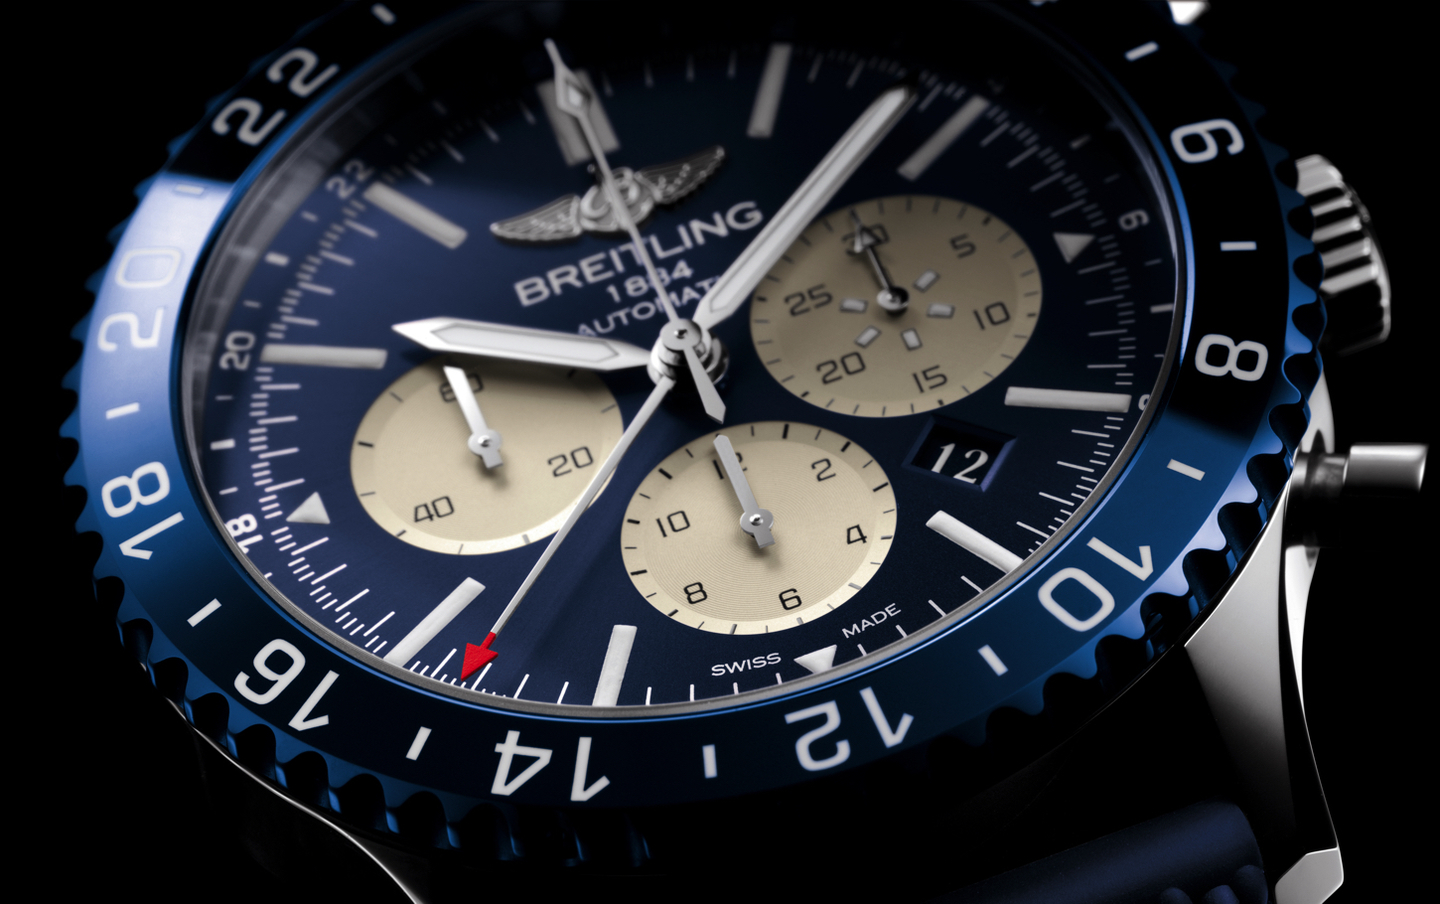 Breitling blue boutique editions